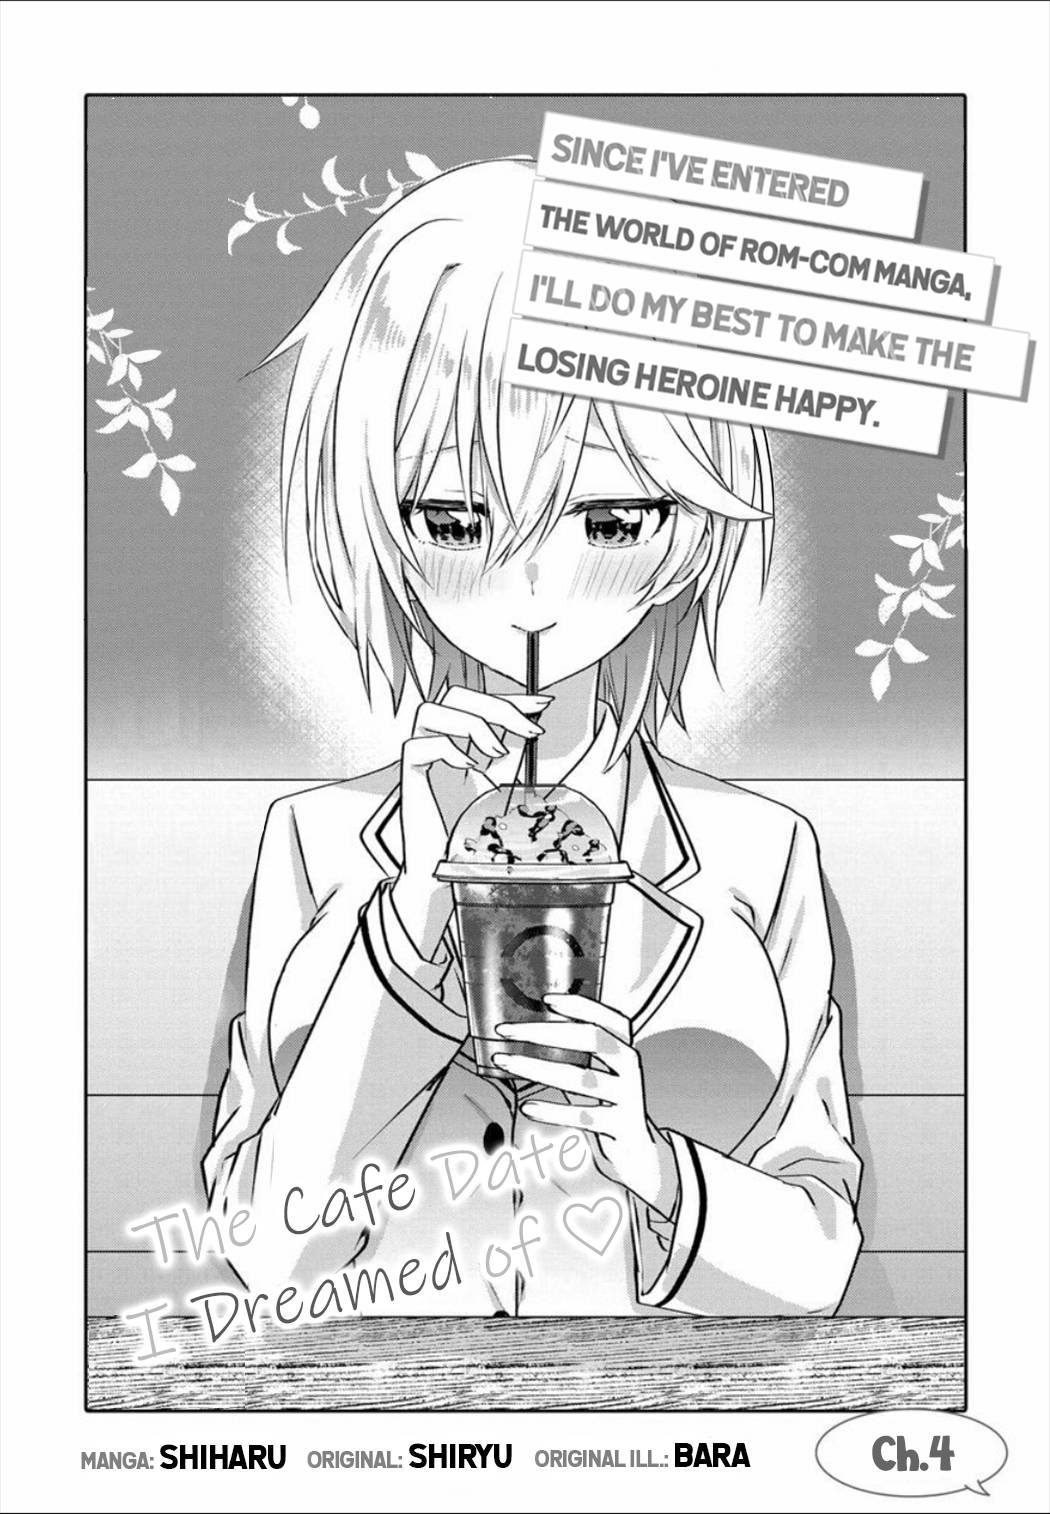 Since I’Ve Entered The World Of Romantic Comedy Manga, I’Ll Do My Best To Make The Losing Heroine Happy - chapter 4.1 - #1